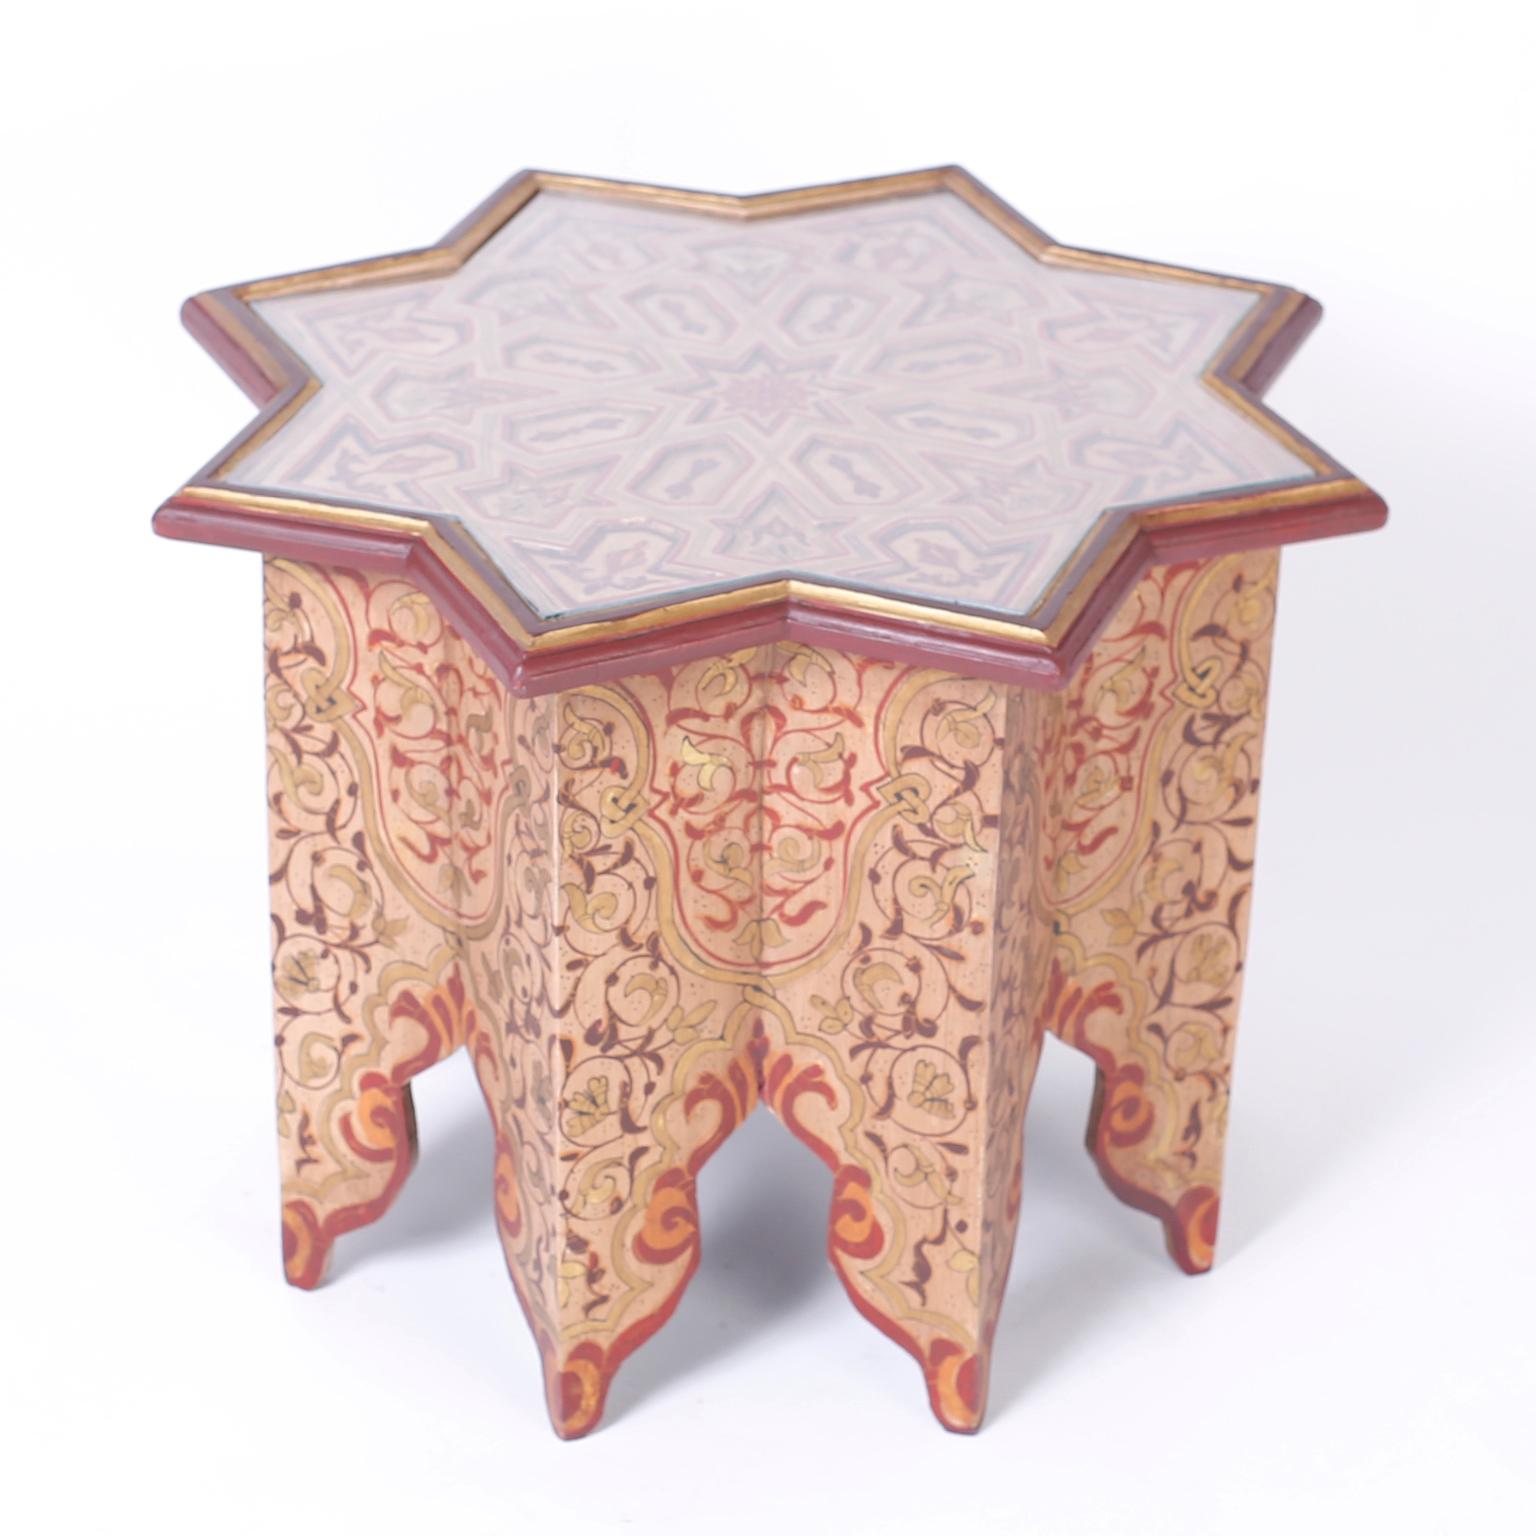 Moroccan wood table or stand with a star form top with removable glass over inset geometric designs. The sixteen sided base is painted with floral decorations and features Moorish arched legs.